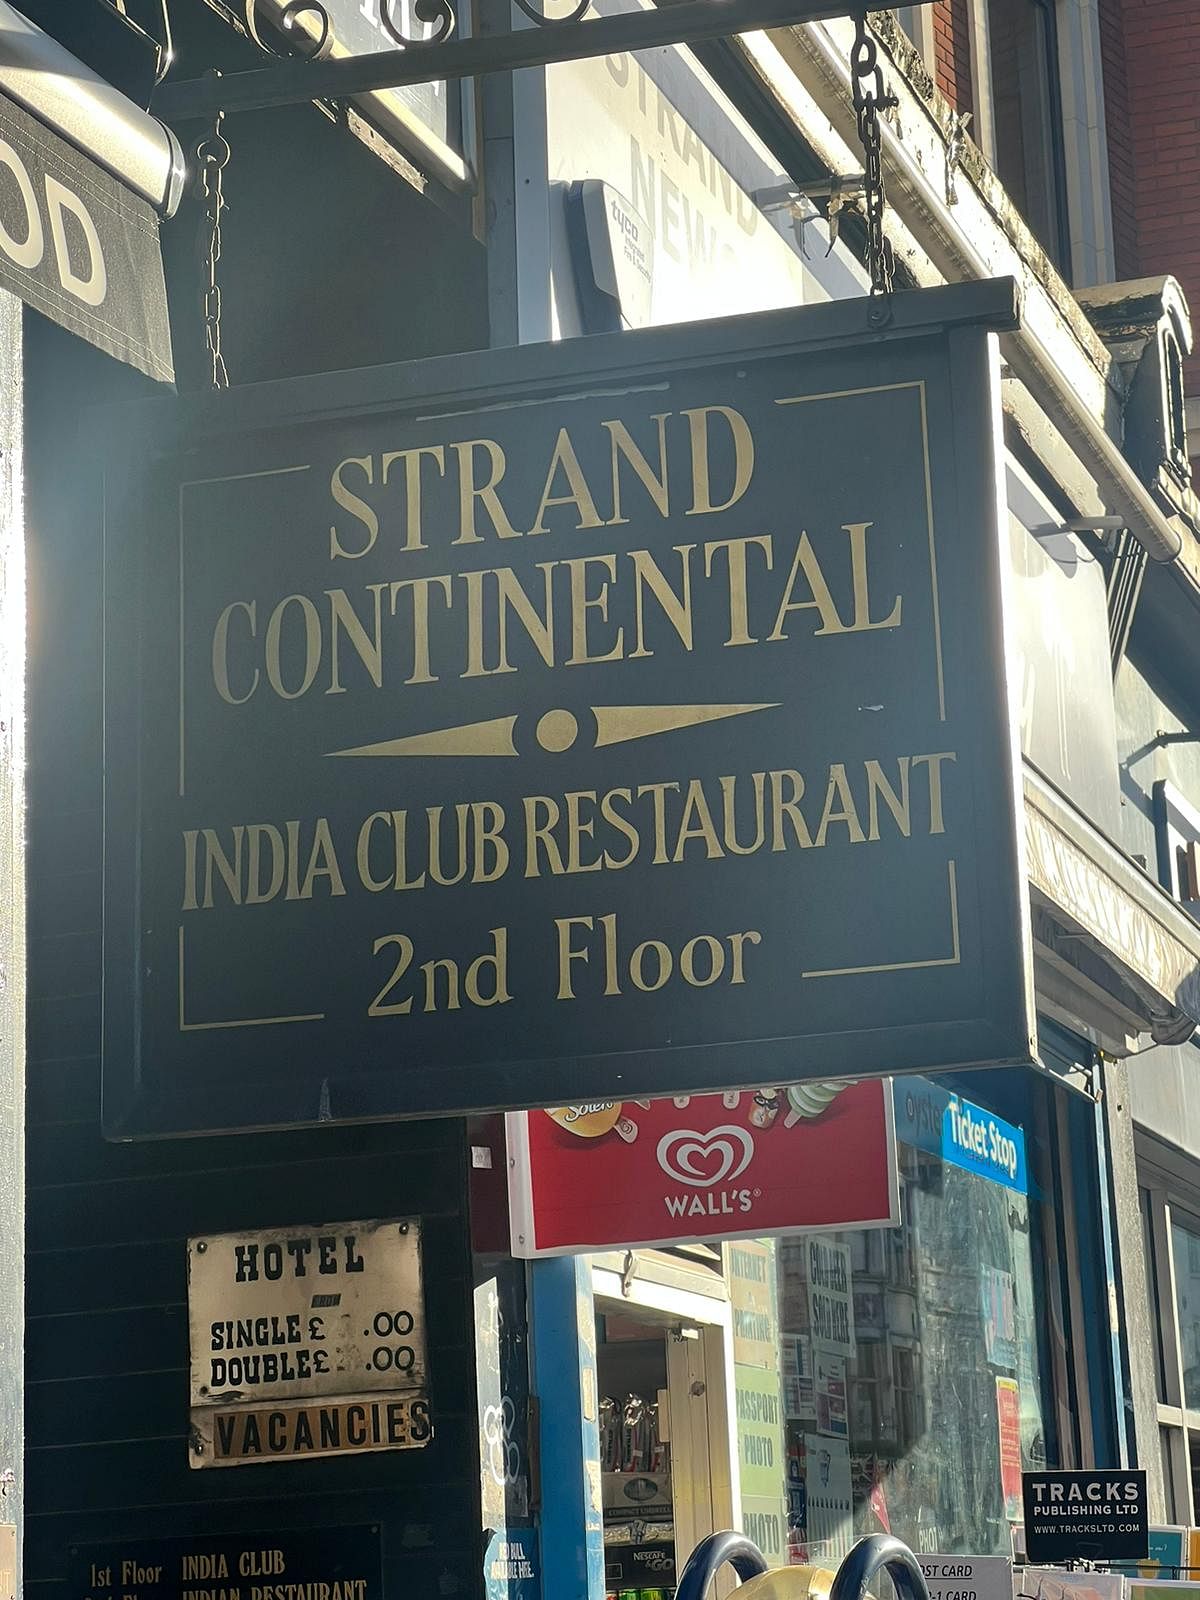 The India Club restaurant is on the second floor of the Hotel Strand Continental | Ayesha Siddiqa